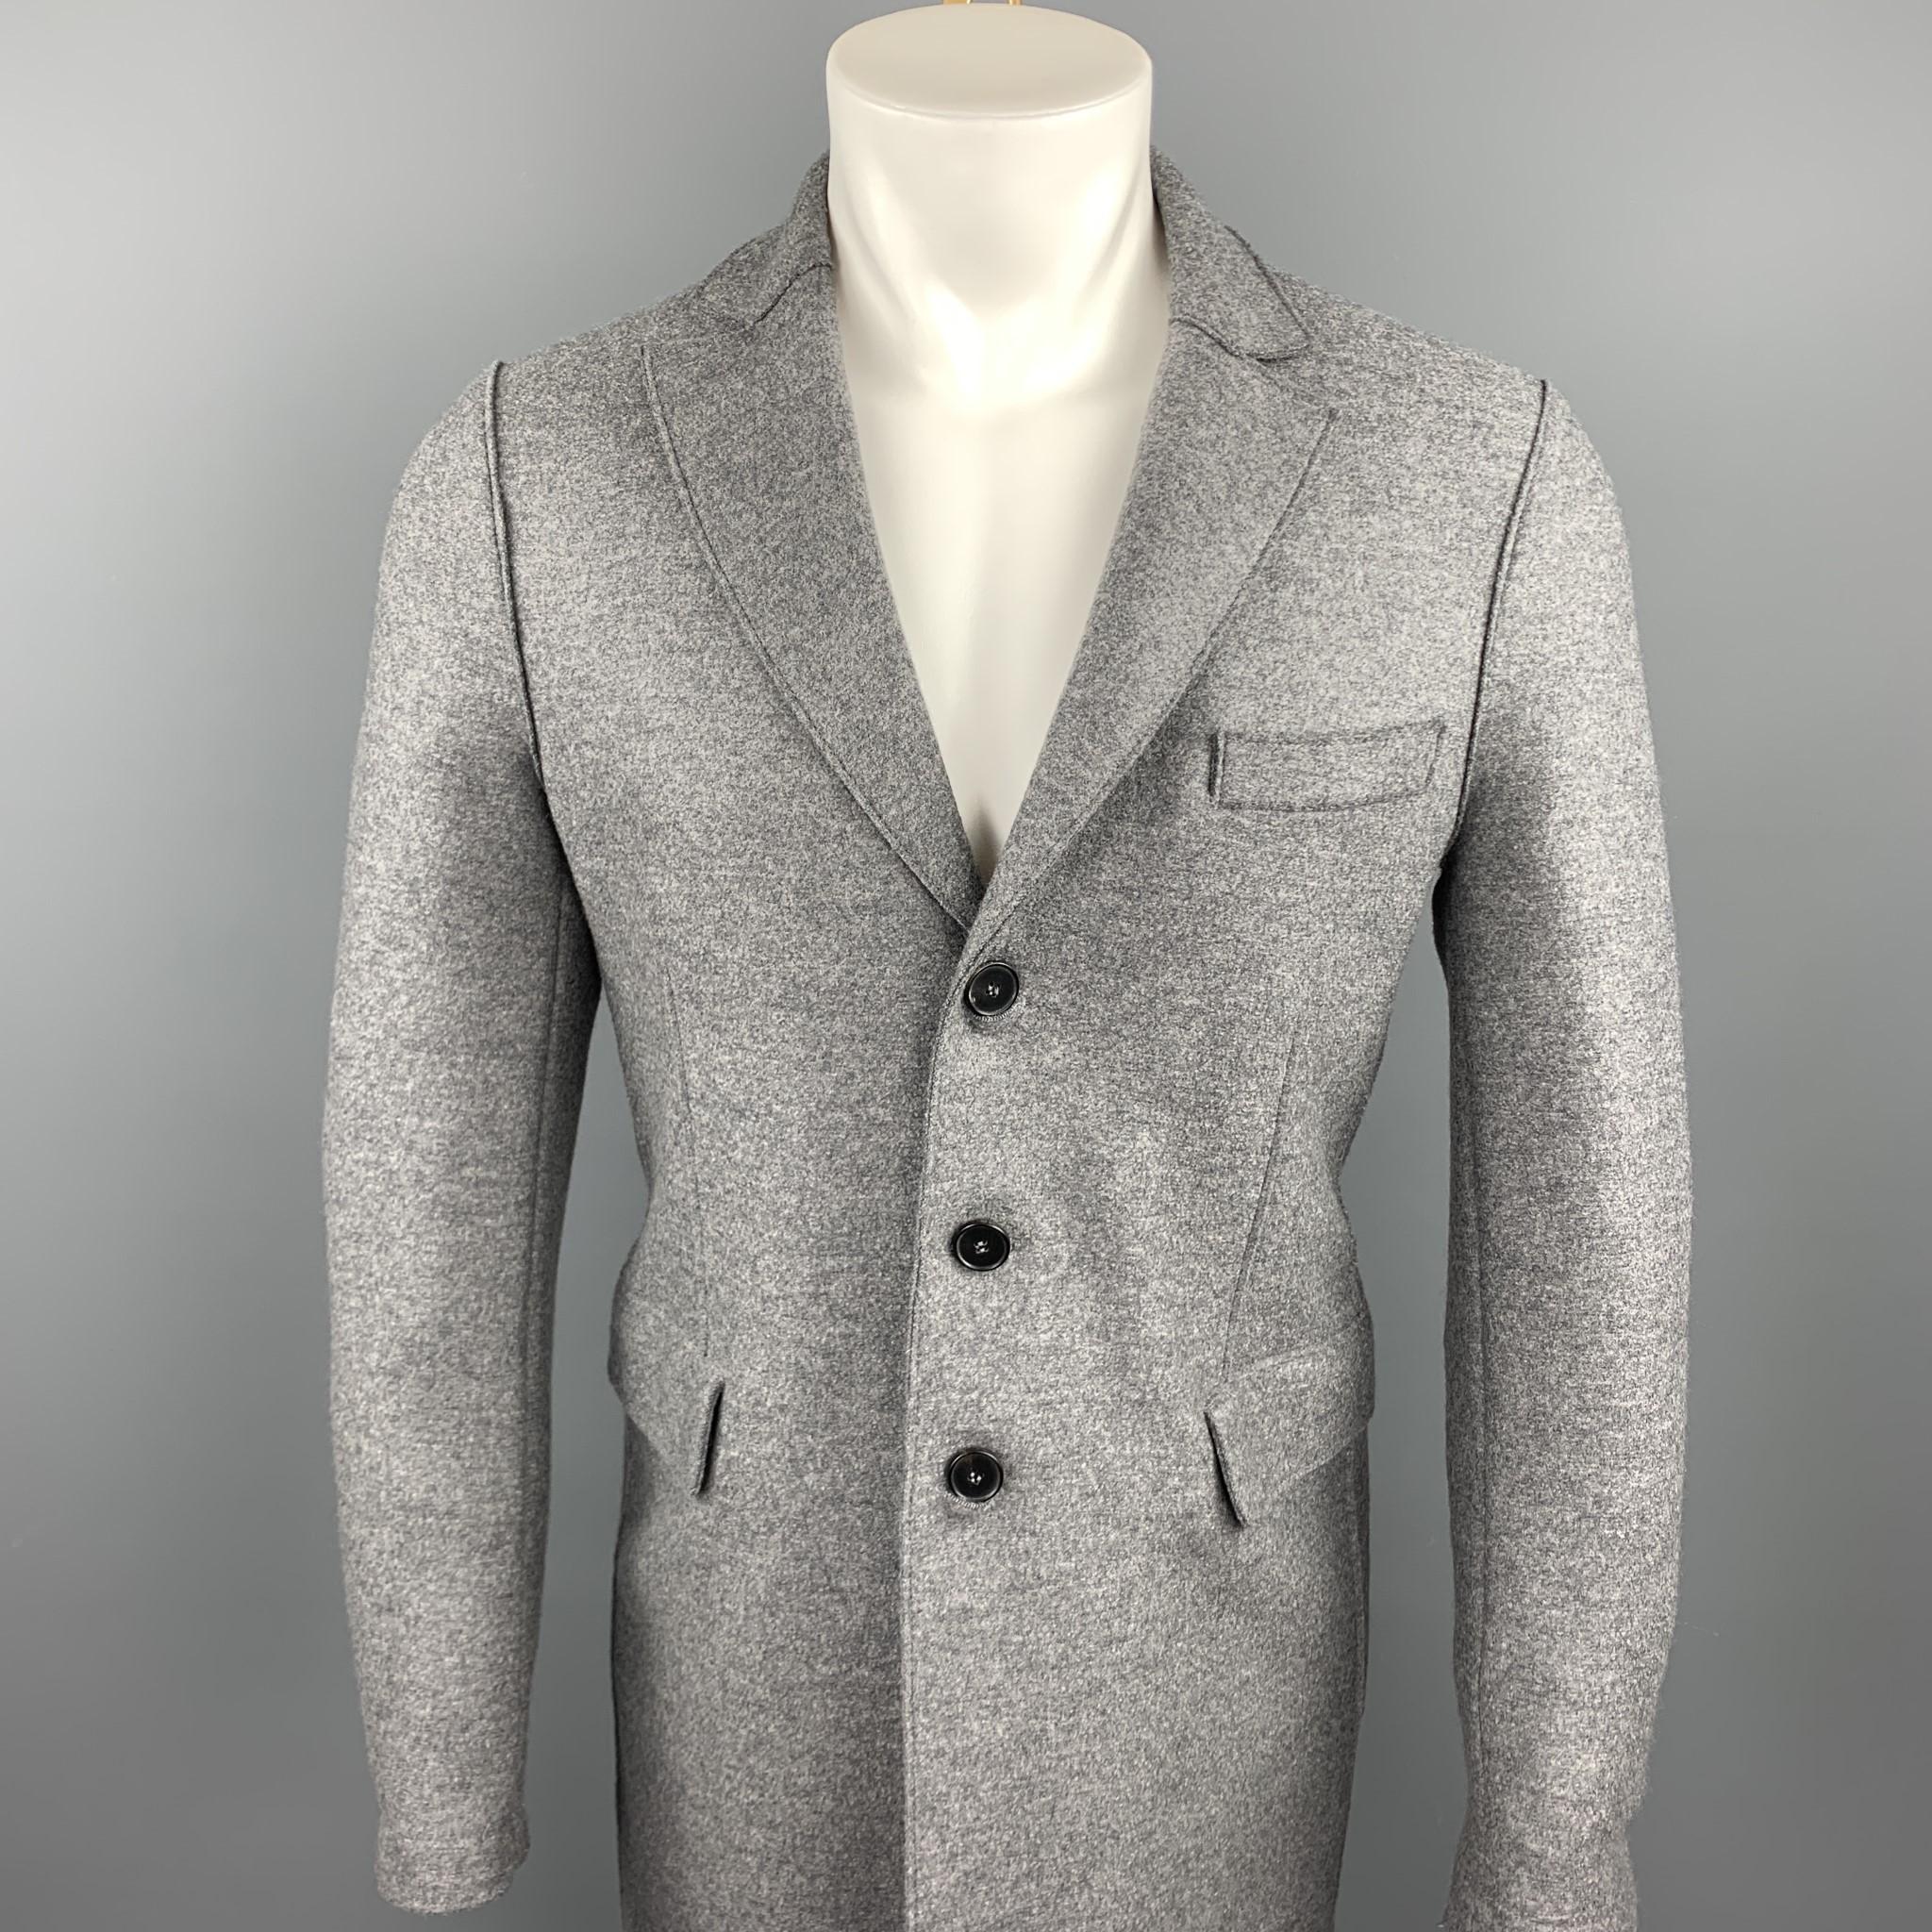 HARRIS WHARF LONDON coat comes in a gray heather wool featuring a notch lapel style, flap pockets, and a buttoned closure. Made in England.

Excellent Pre-Owned Condition.
Marked: 46

Measurements:

Shoulder: 16.5 in.
Chest: 38 in. 
Sleeve: 27.5 in.